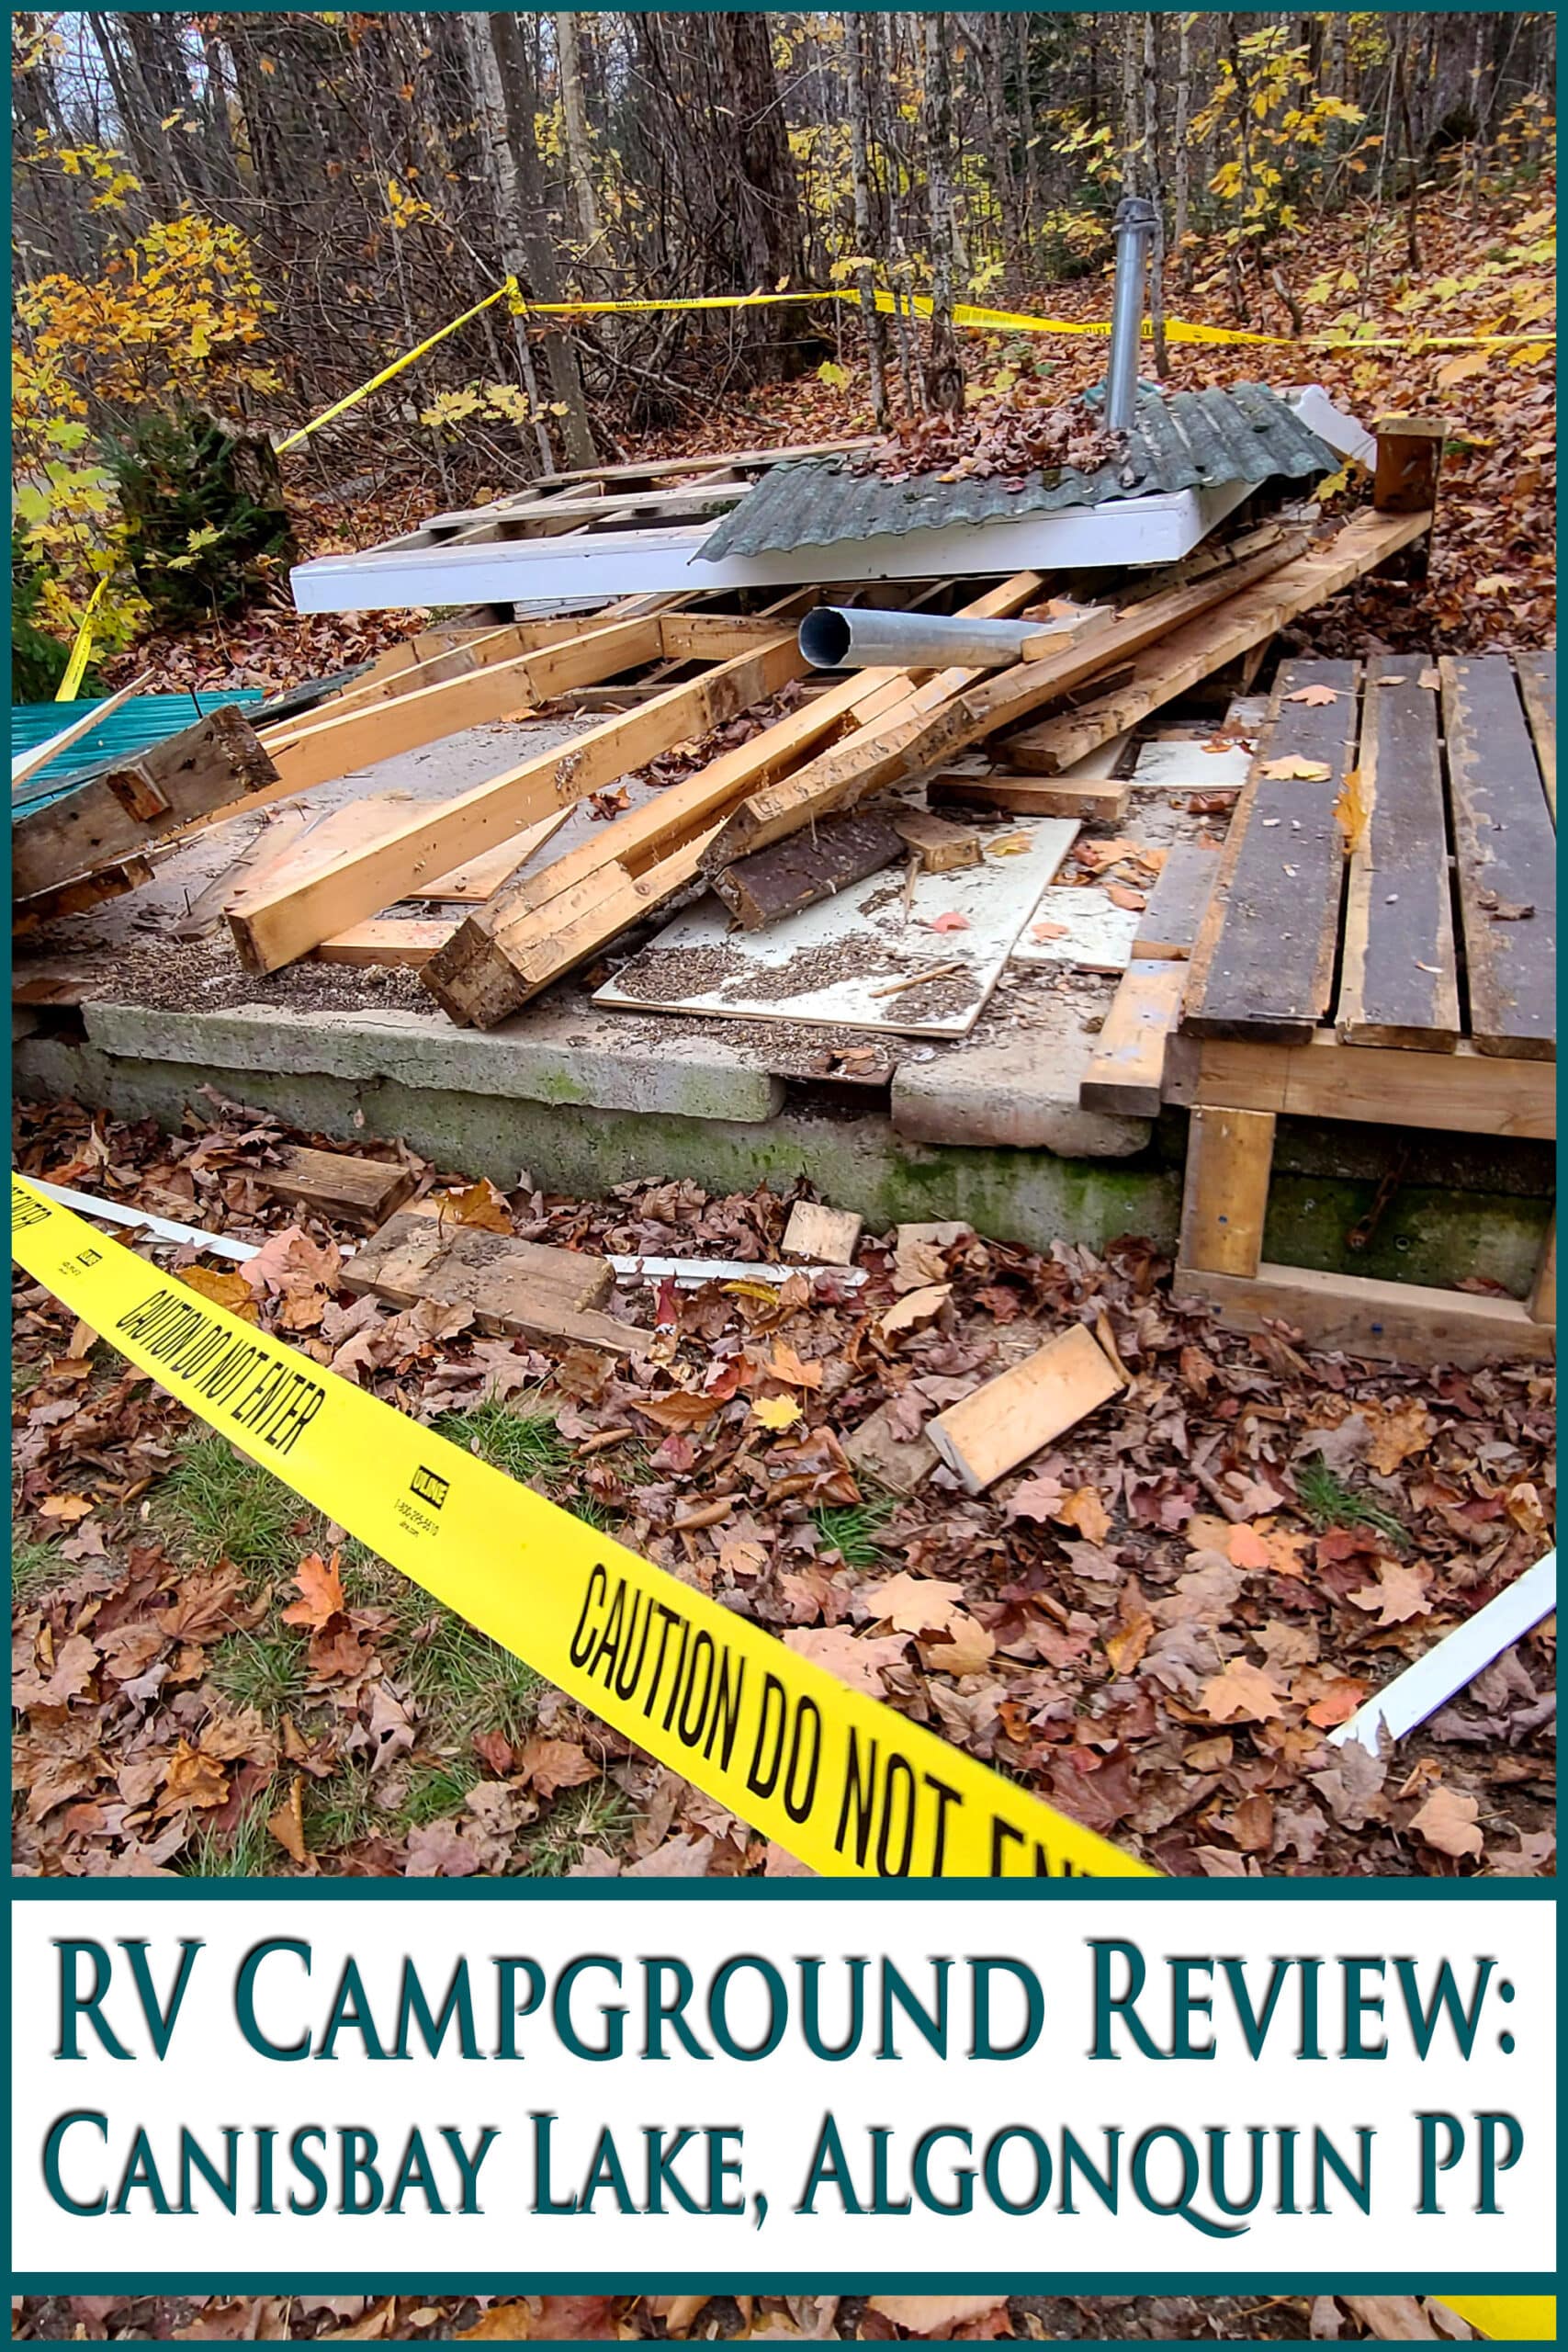 A collapsed outhouse at a campground. Overlaid text says RV Campground Review: Canisbay Lake, Algonquin PP.